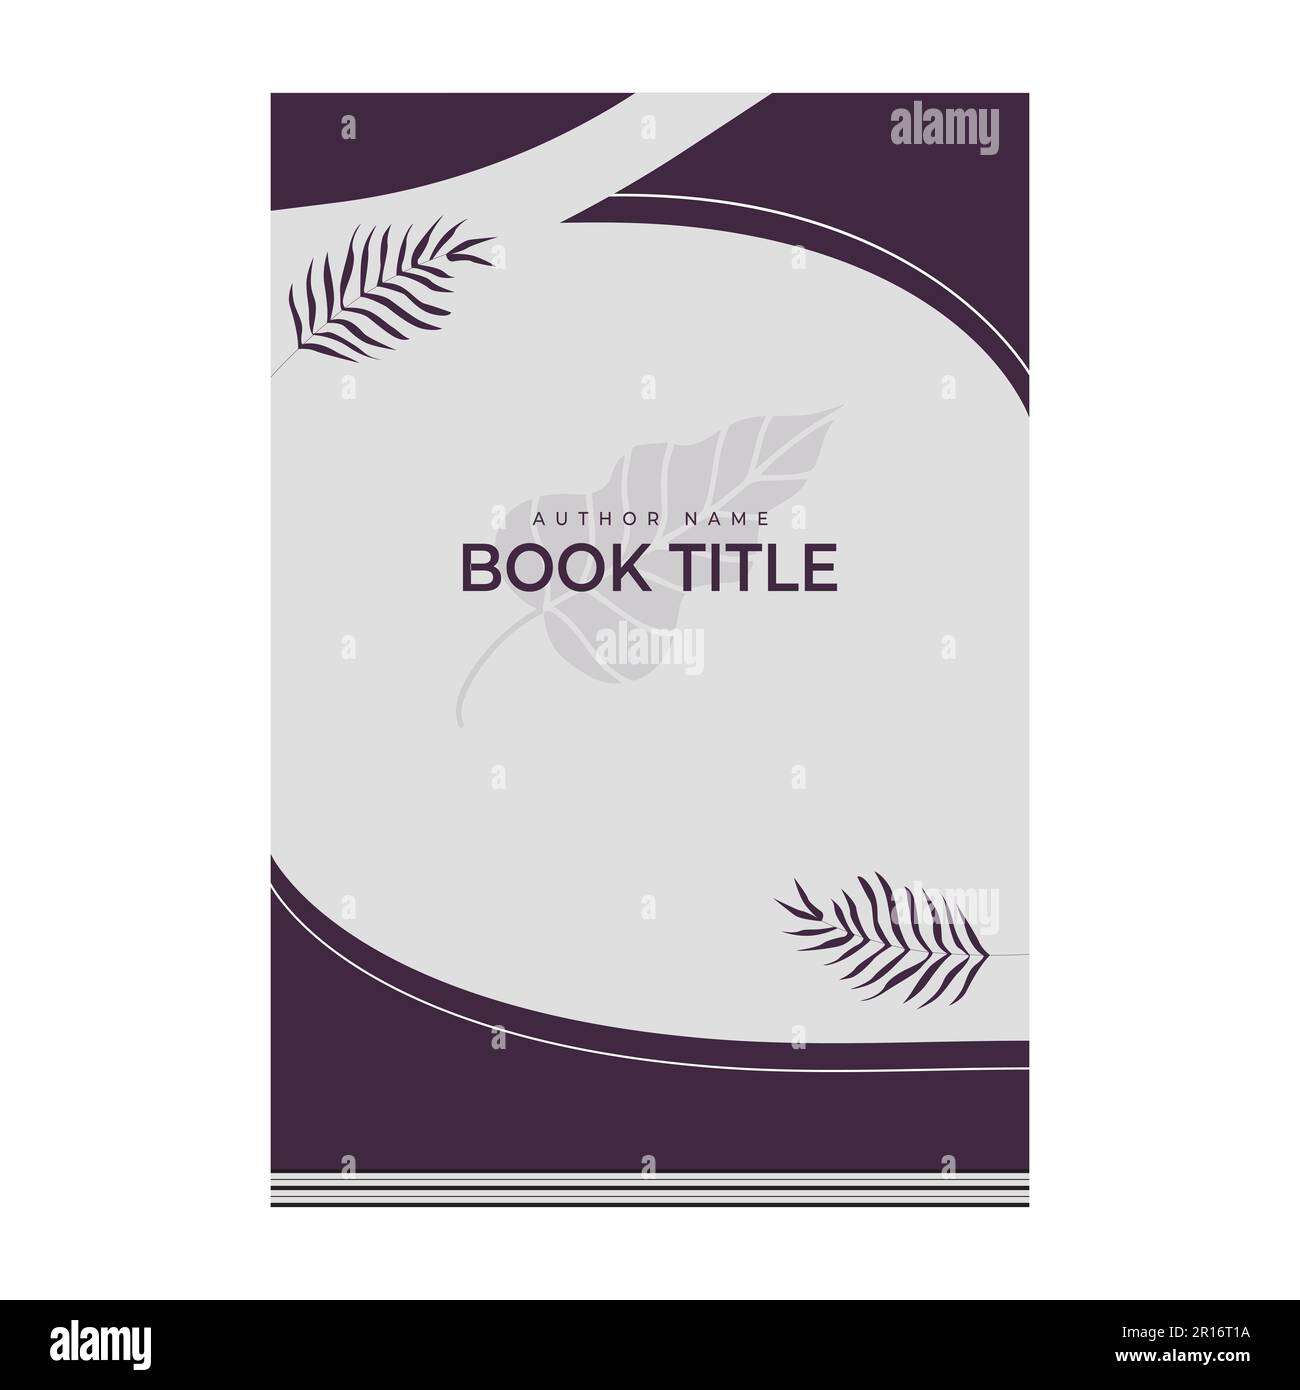 Front page of  Book Cover Design With Leaves, Flyer Poster Book Title Author Name Design Illustration Stock Photo